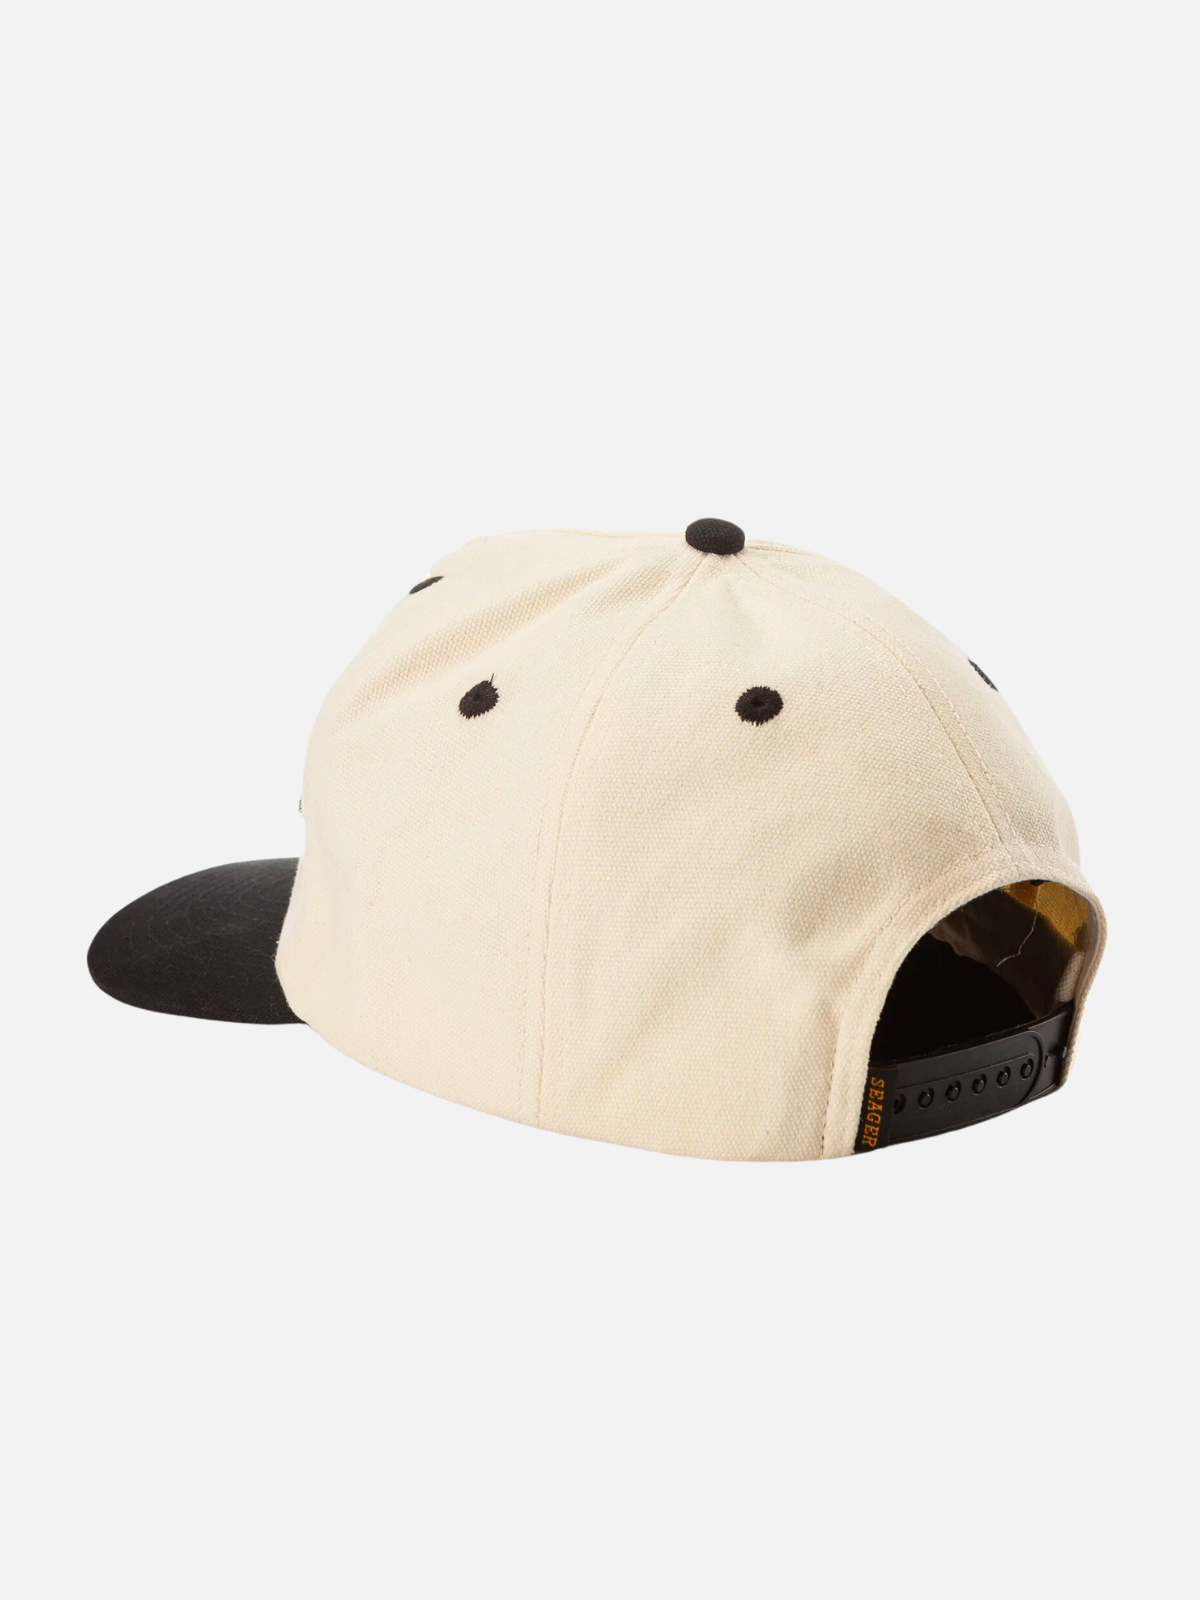 seager wilson snapback black white cream yellow gold embroidered patch kempt athens ga georgia men's clothing store